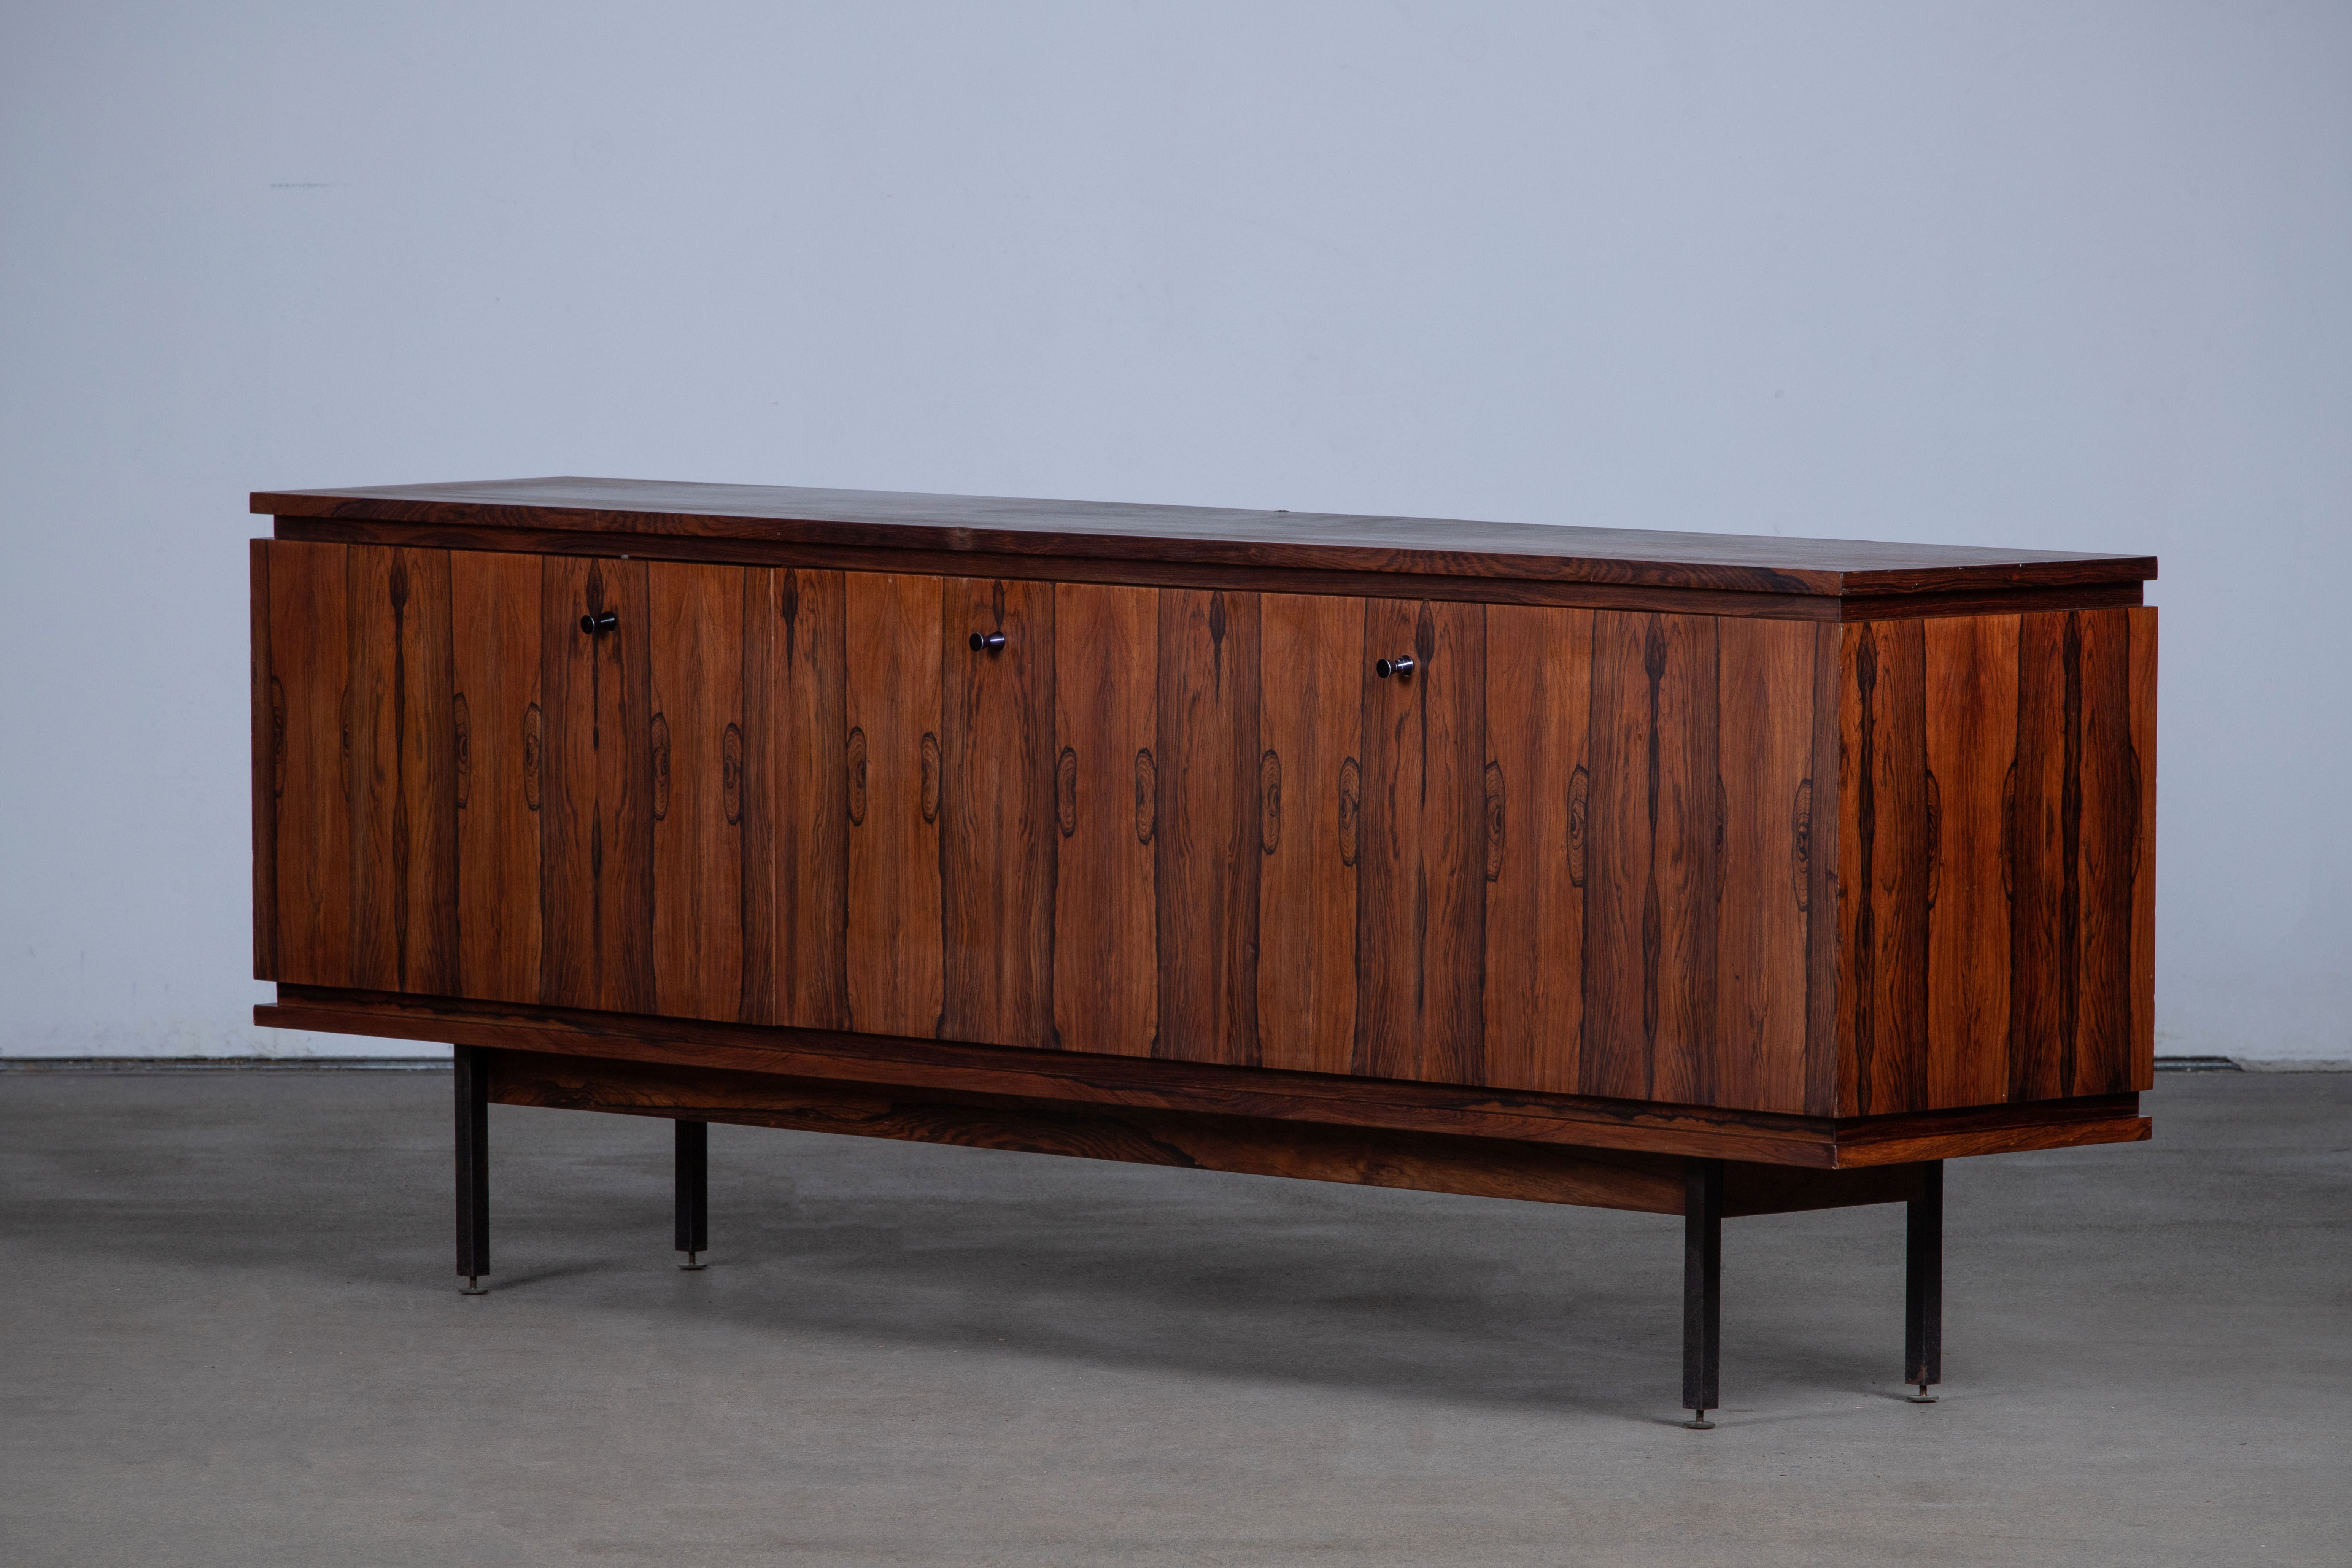 French mid-century sideboard, designed in the 1960s it features minimal lines.
An elegant piece.
Good condition with minor wear.